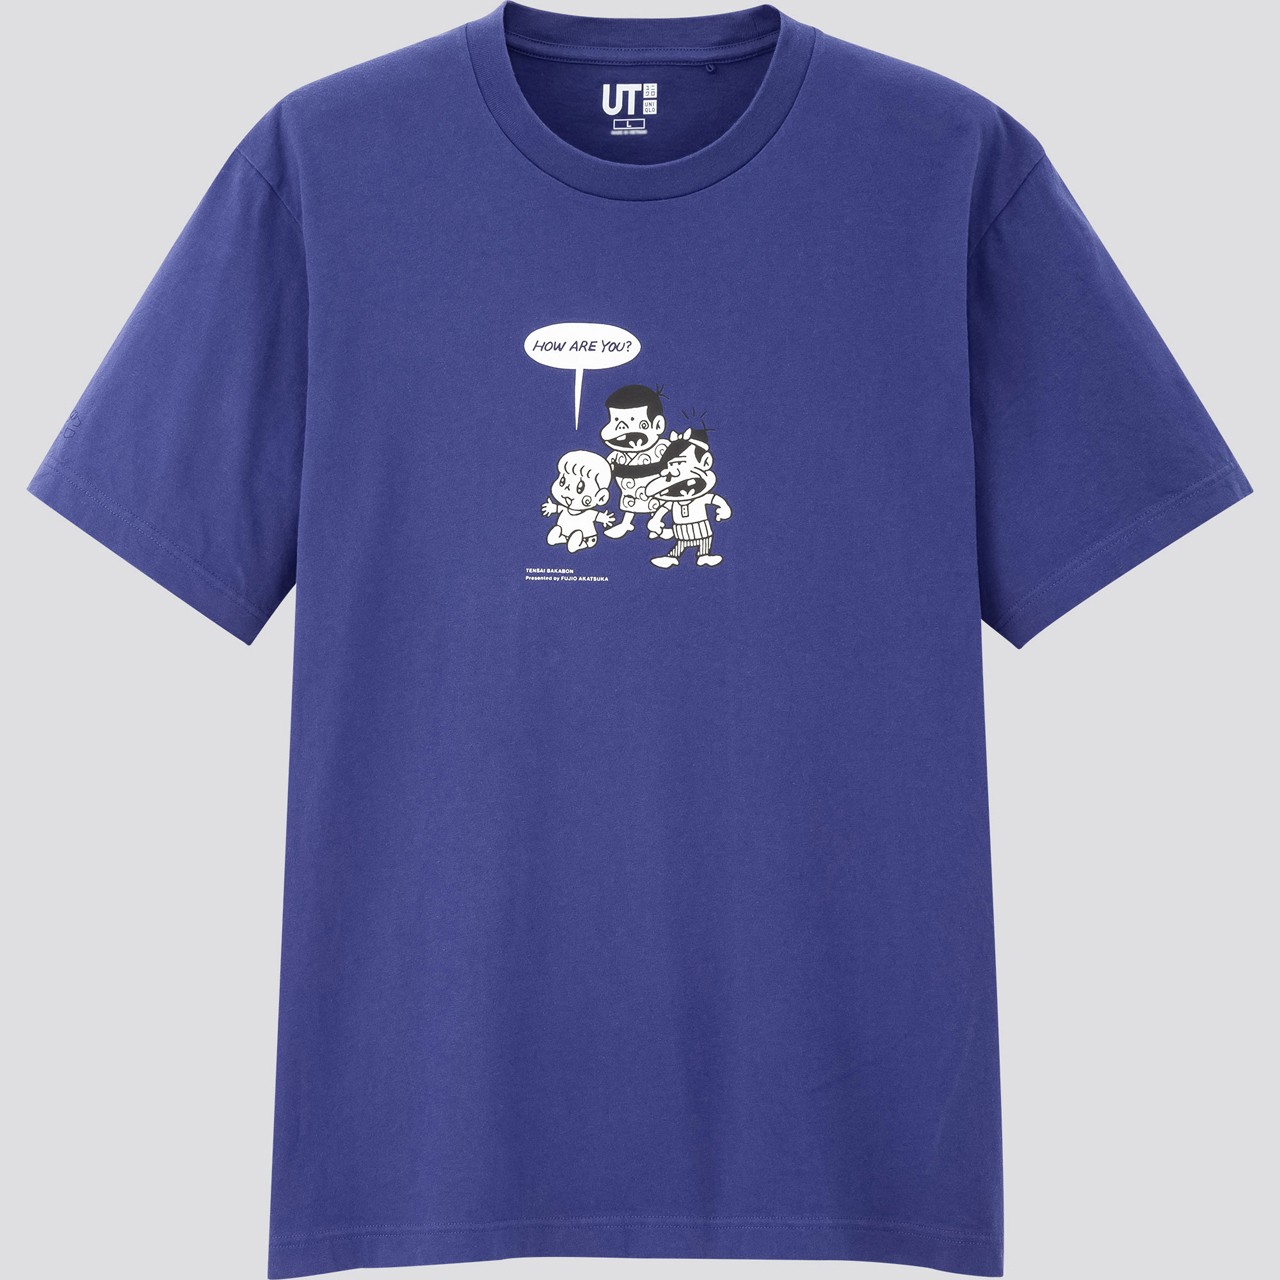 Uniqlo releases Manga-indebted Graphic Tees